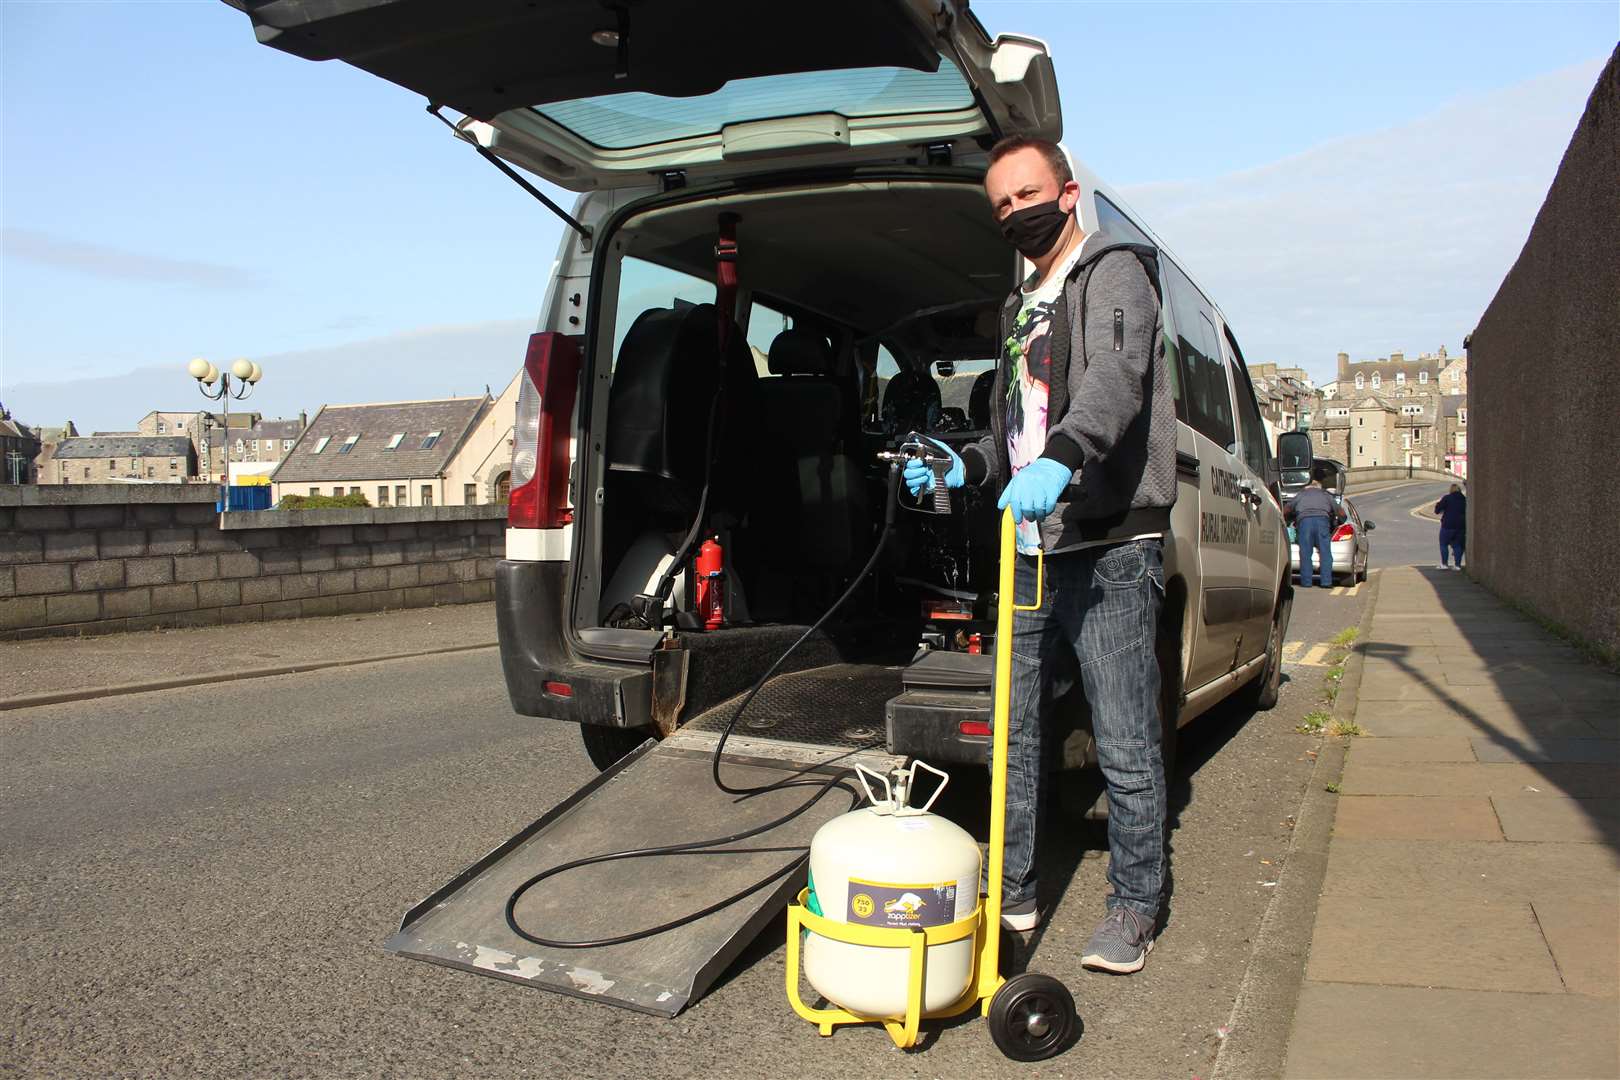 Caithness Rural Transport driver Andrew Sutherland demonstrating a Zapptizer device which allows disinfecting sanitiser to be applied to vehicles via a spray mechanism.